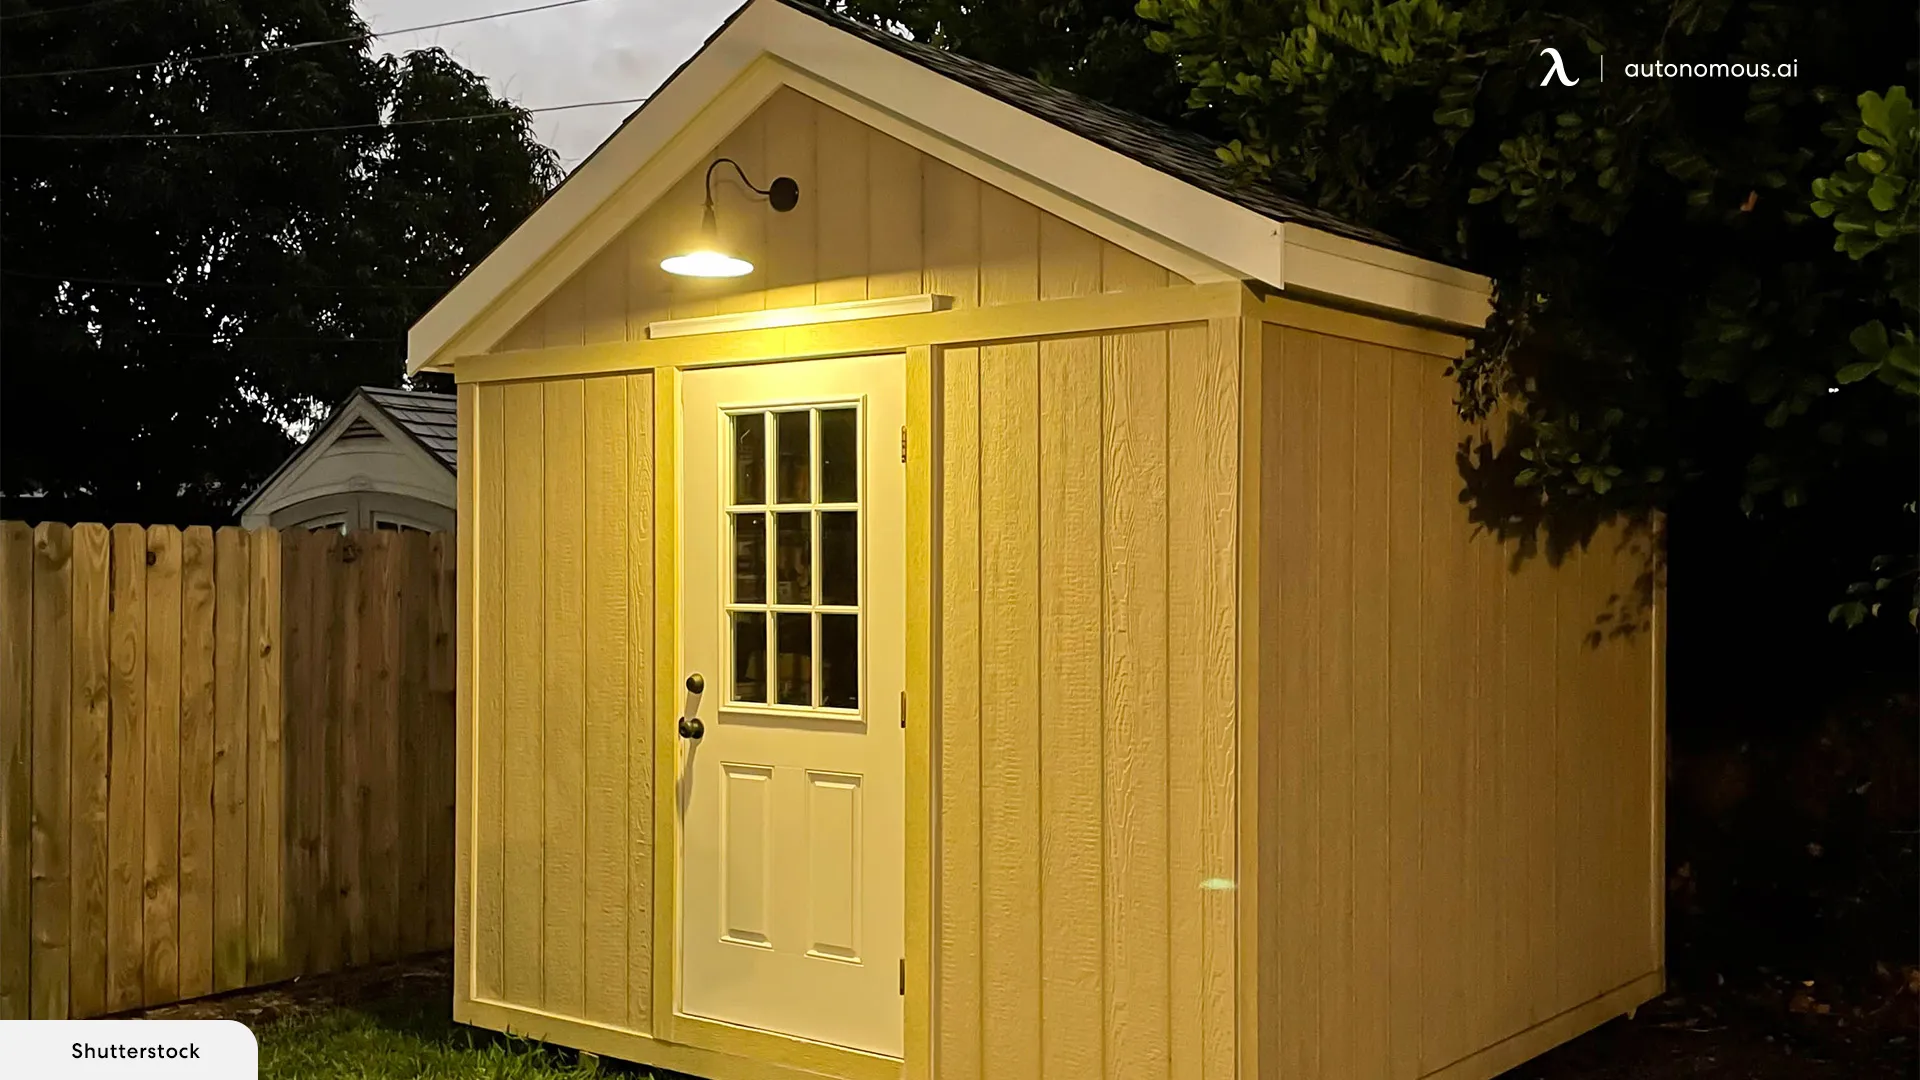 Getting Electricity to Your Shed: Regulations and Hazards